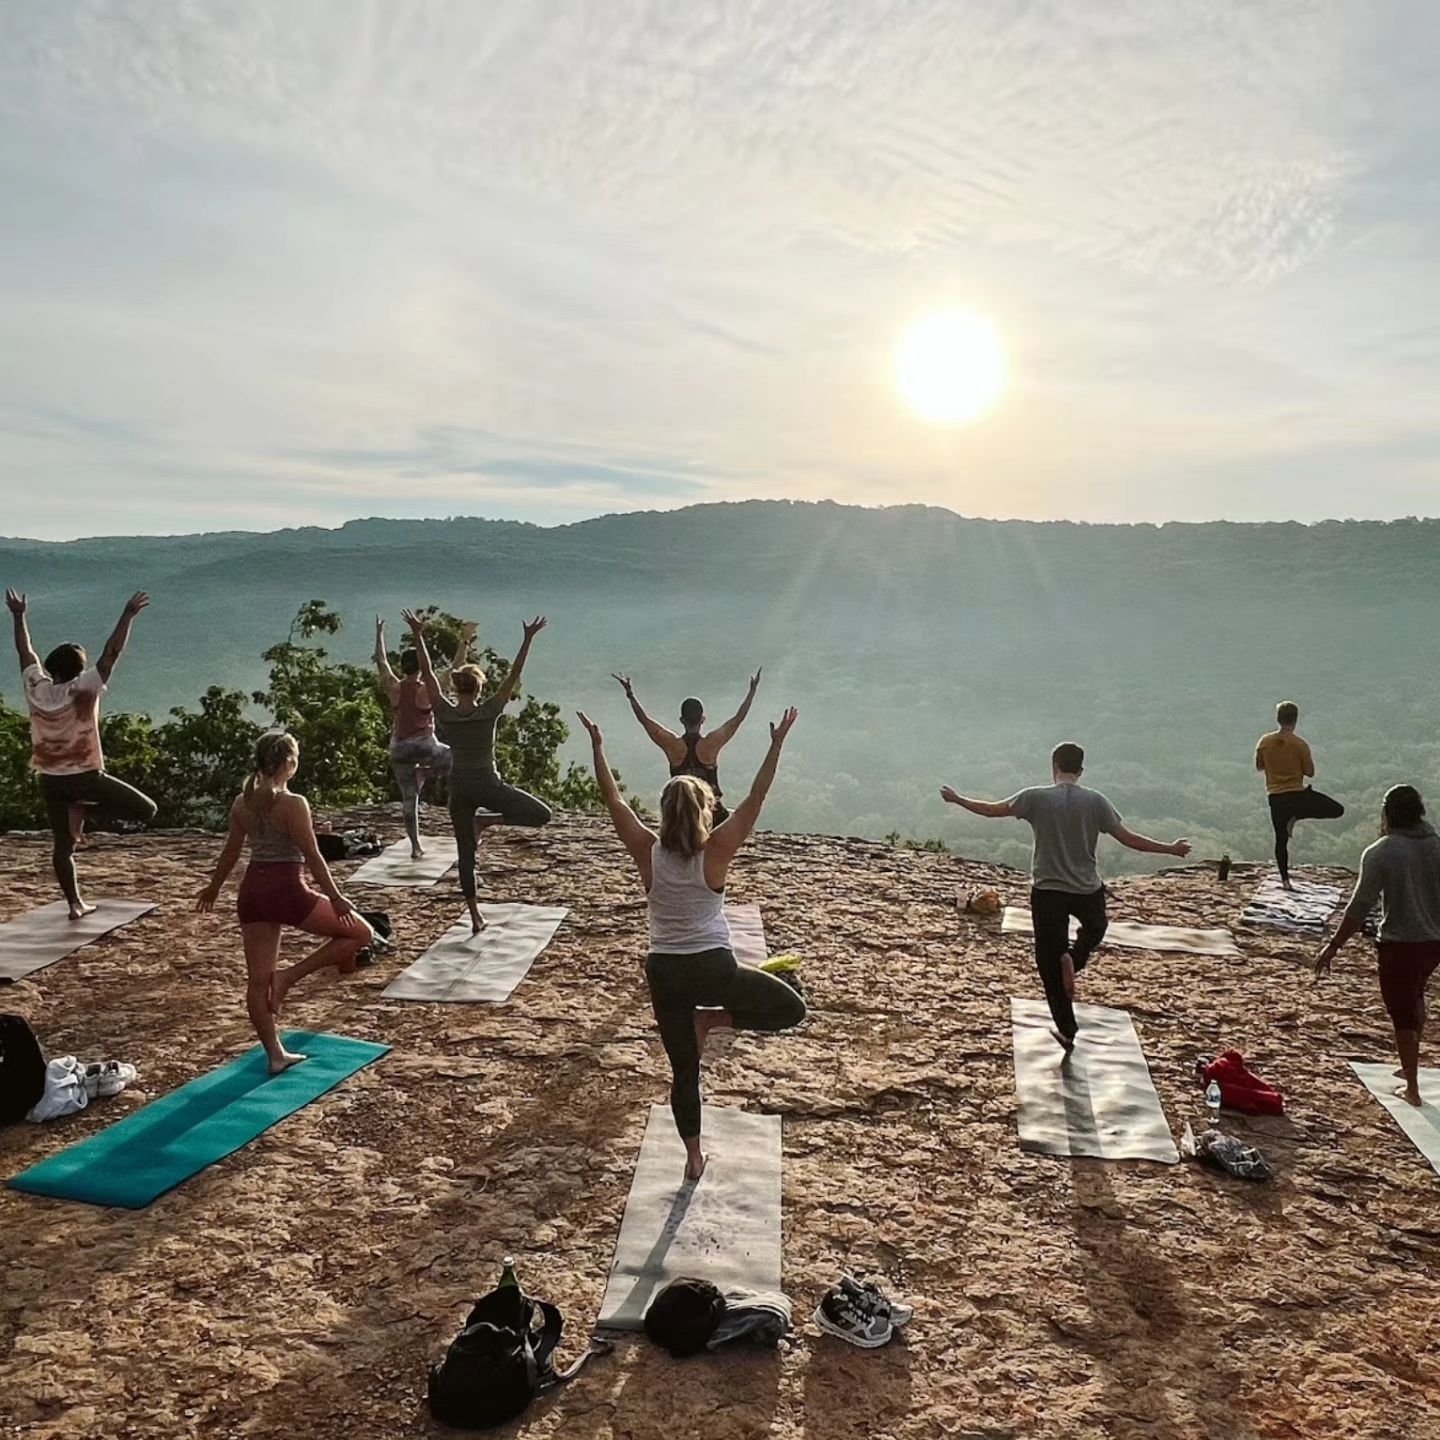 HIKE &amp; YOGA SUNRISE SERIES IS BACK! 🌄 

Rise &amp; shine and join Ashleigh &amp; Amanda for our outdoor yoga series! 

Our Hike + Yoga Sunrise Series offers a chance to take in nature, connect with community, practice outdoor yoga, and witness t